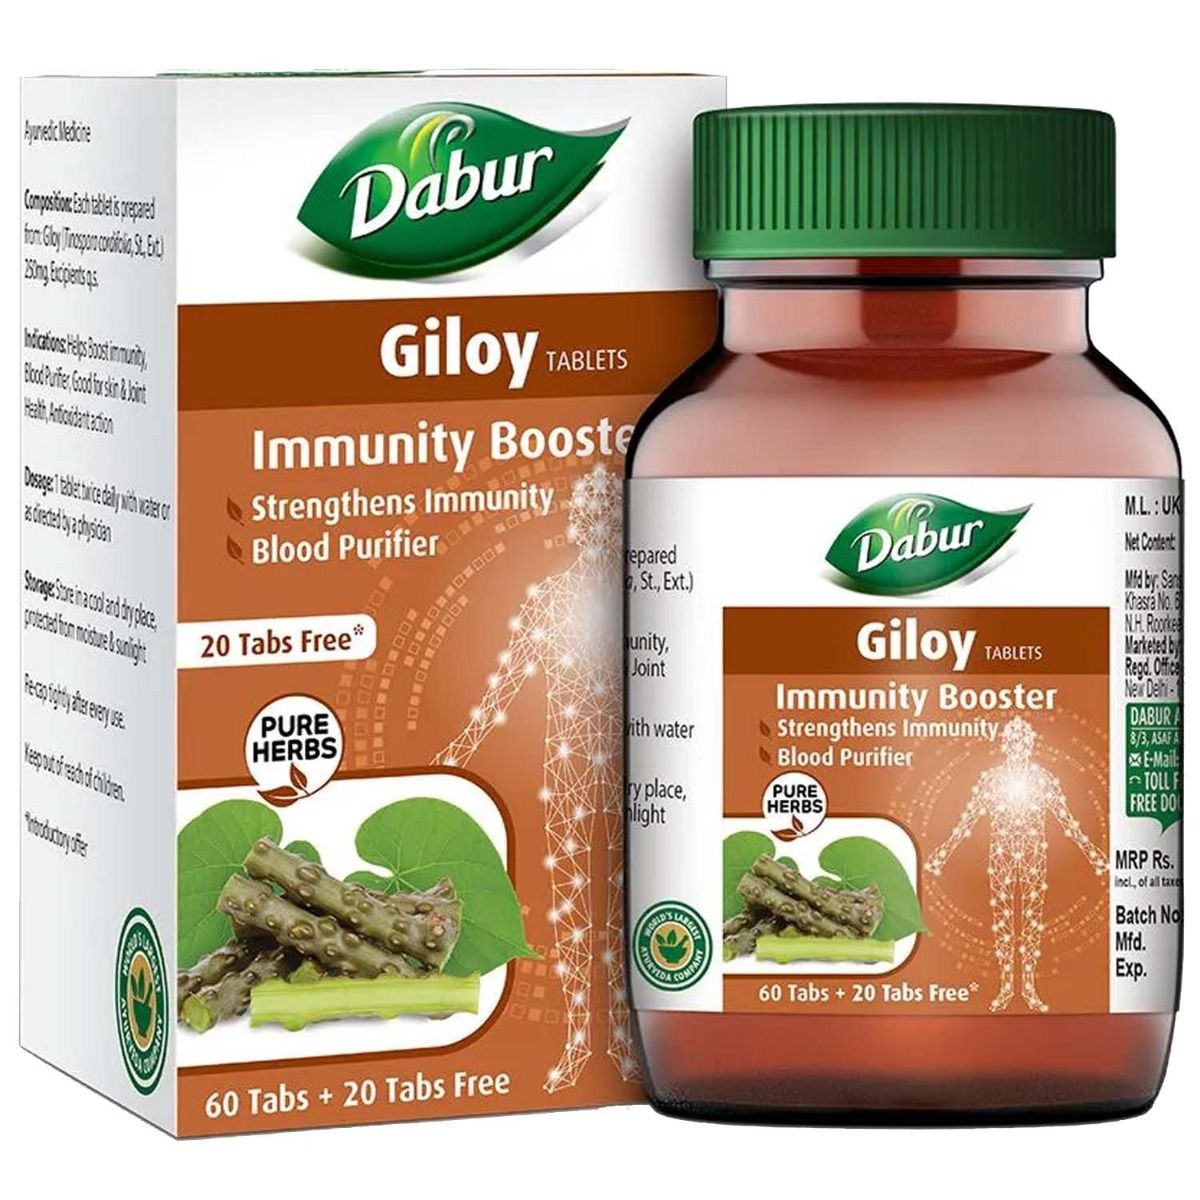 Dabur Giloy, 80 Tablets (60 Tablets + 20 Free Tablets), Pack of 1 